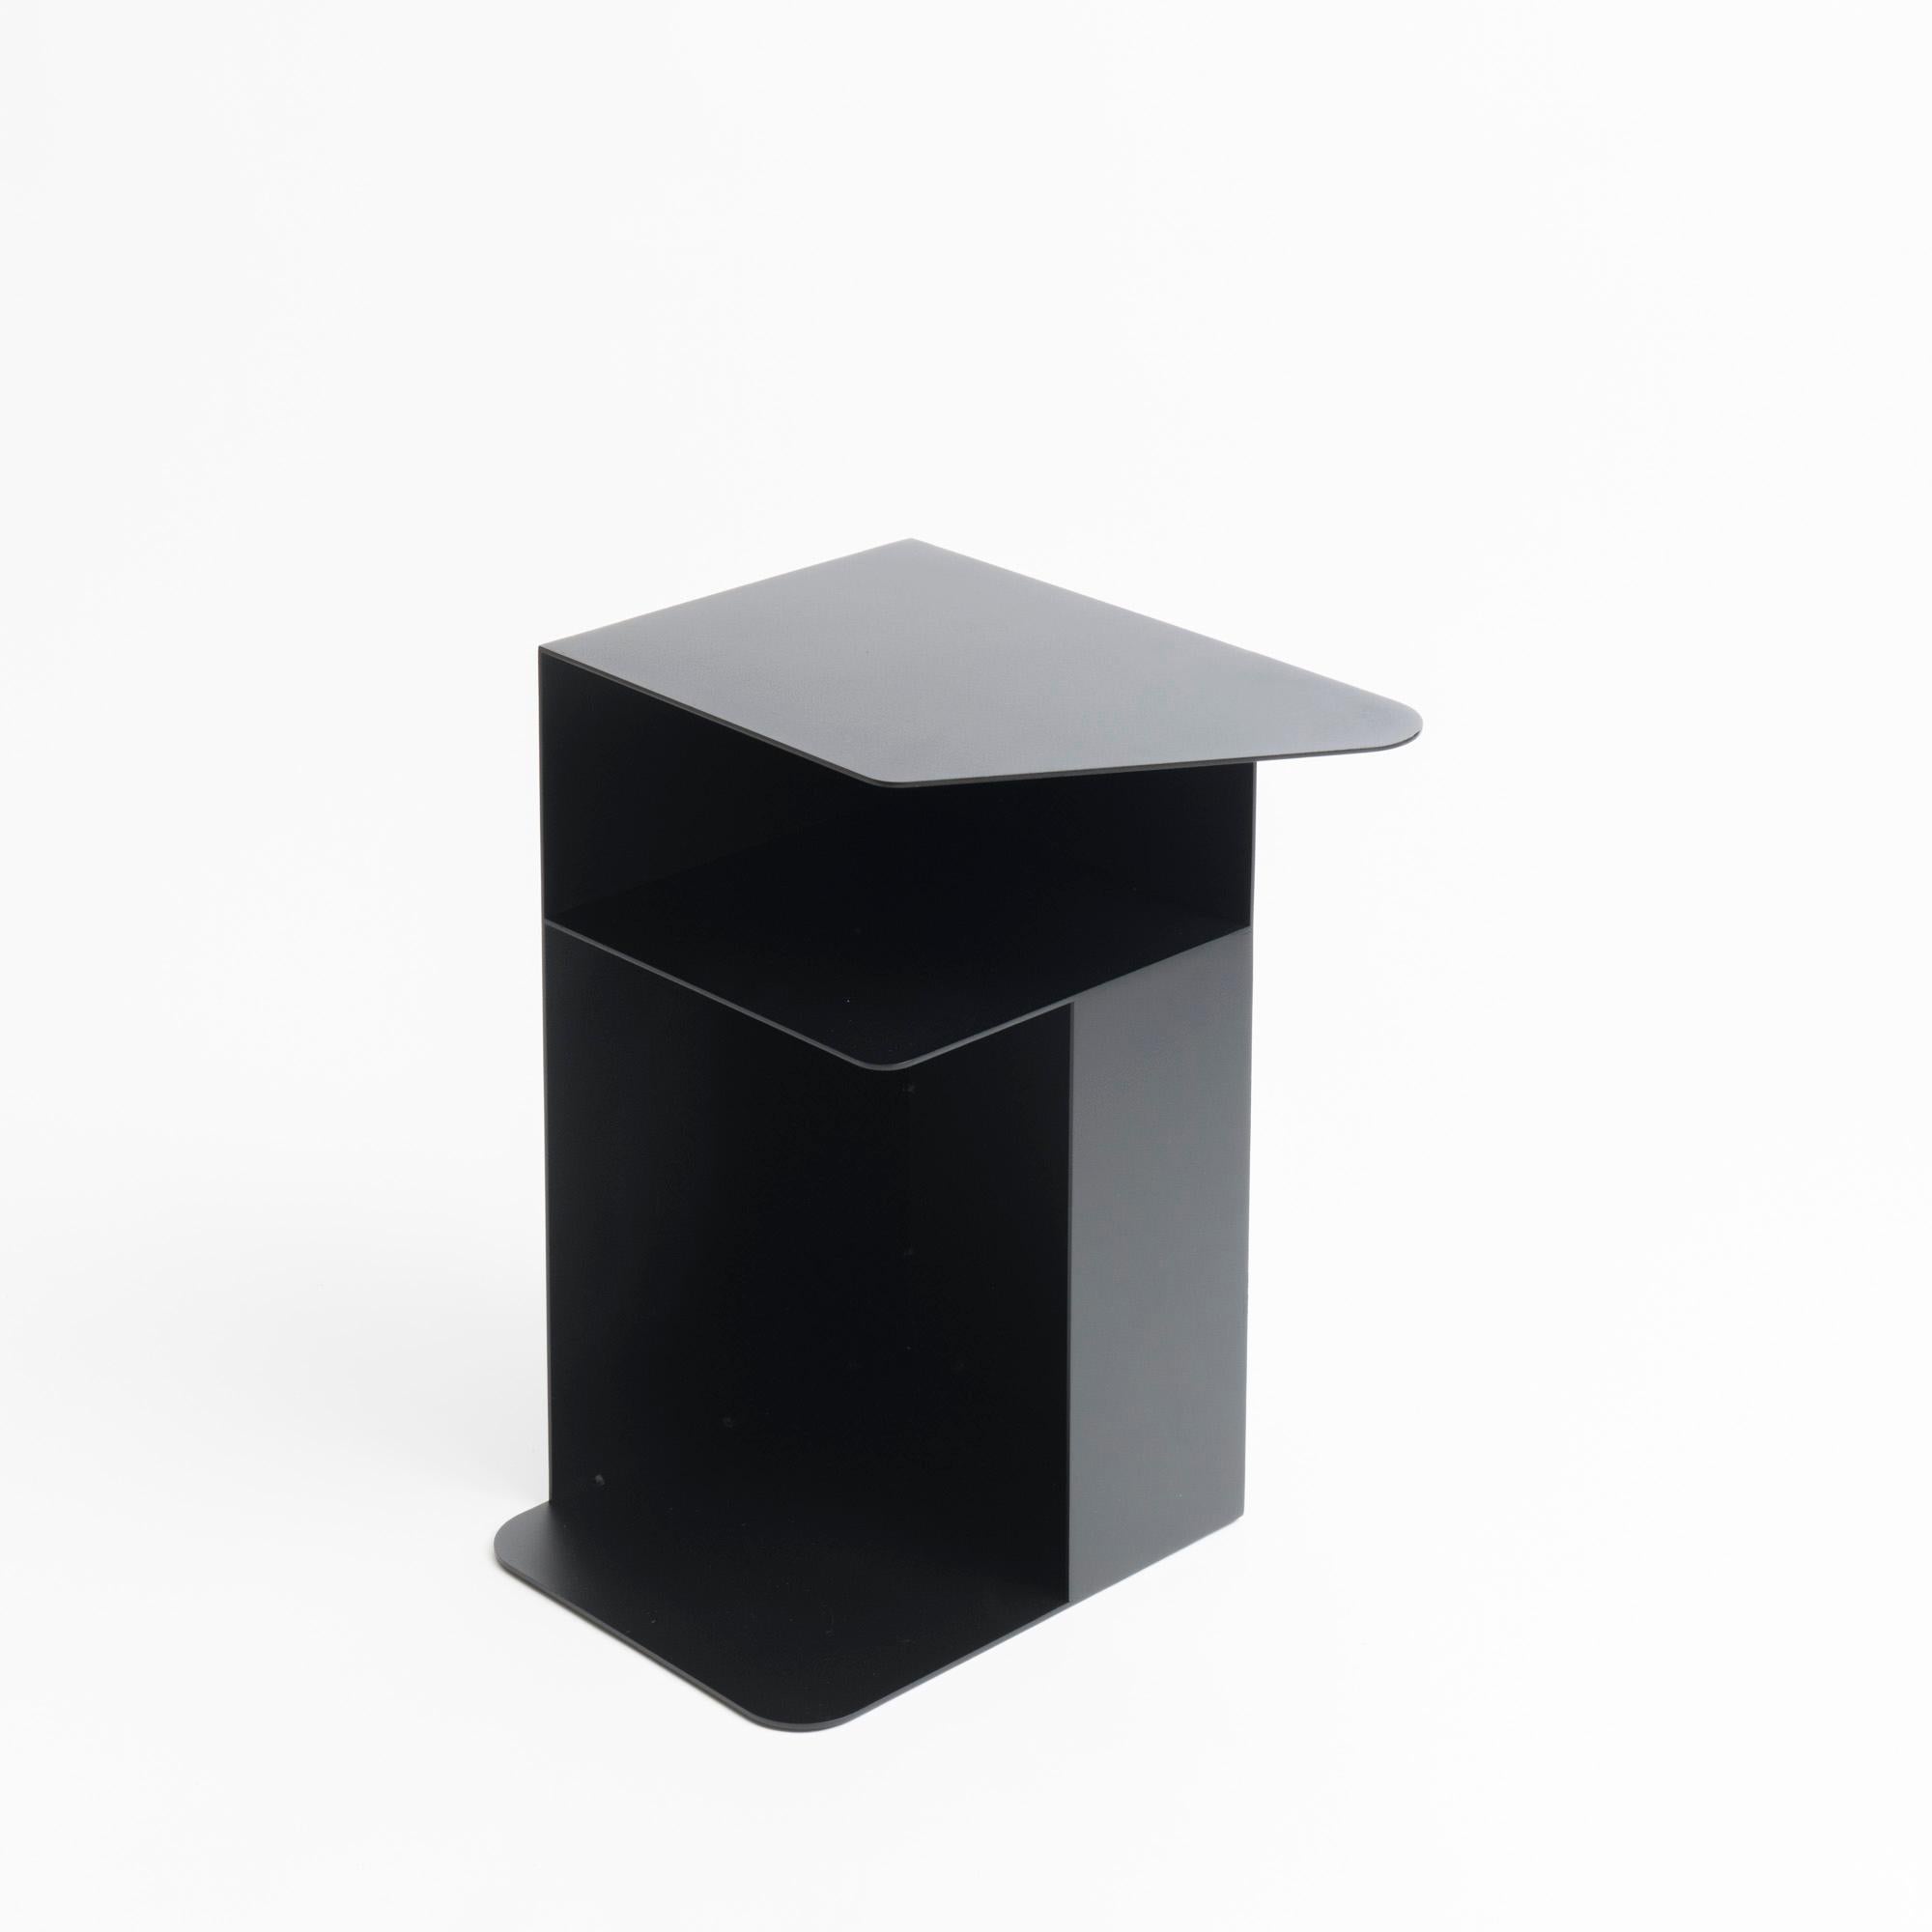 Powder-Coated Black Aluminium Side Table, contemporary minimalist om26 by mjiila - in stock For Sale